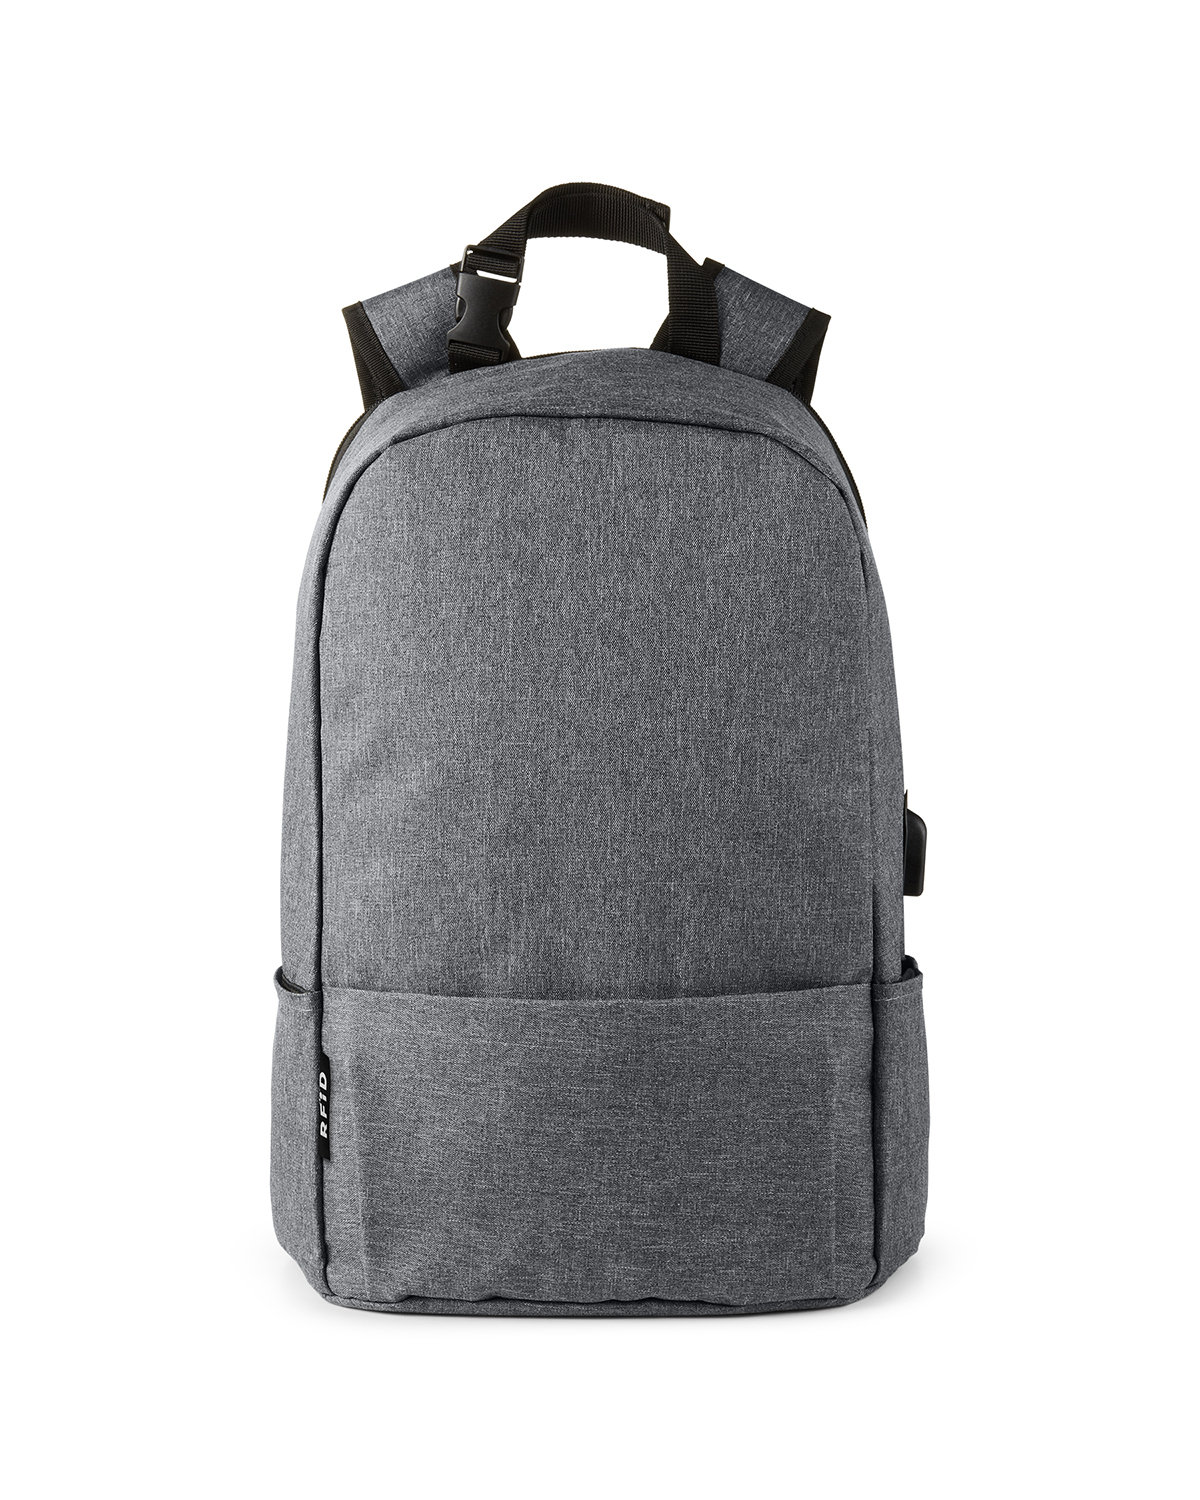 Buy Circuit Anti-Theft Laptop Backpack - Prime Line Online at Best ...